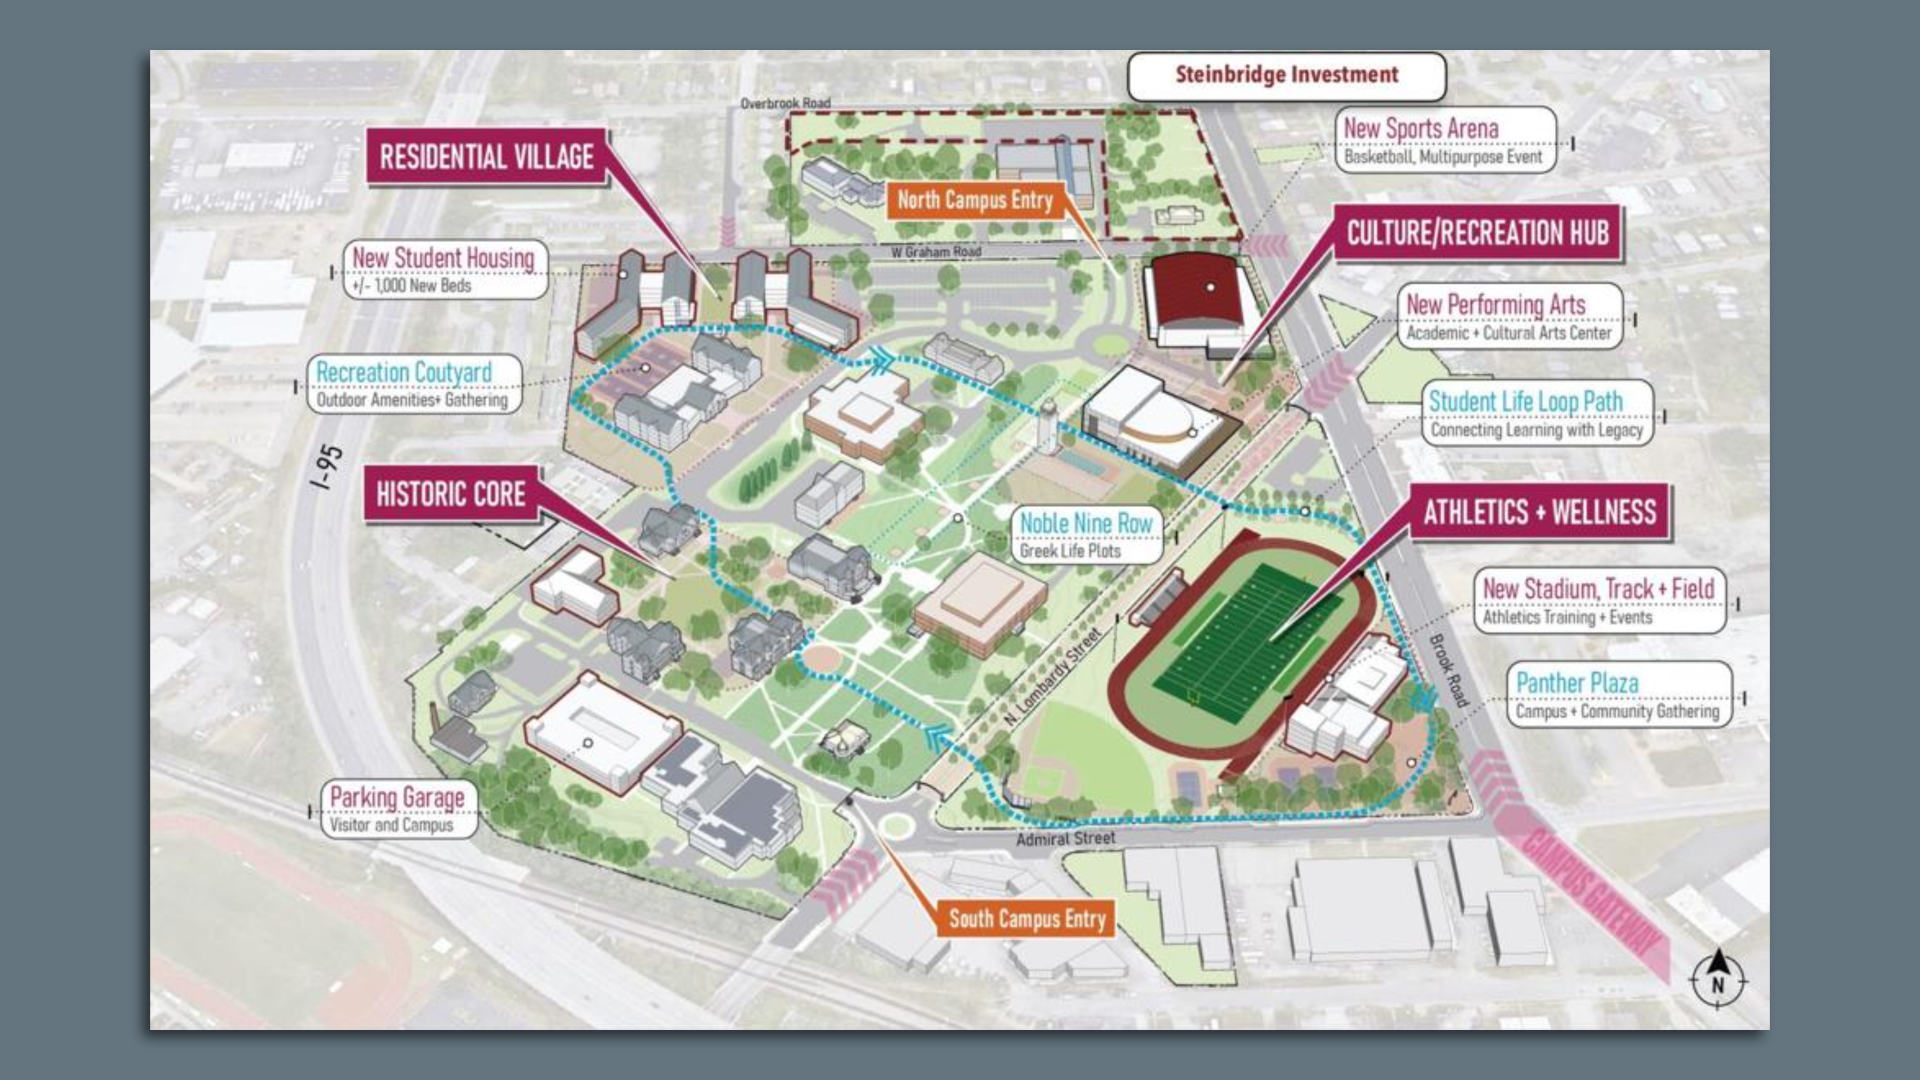 Image shows a map of VUU's current campus with labels for its future plans